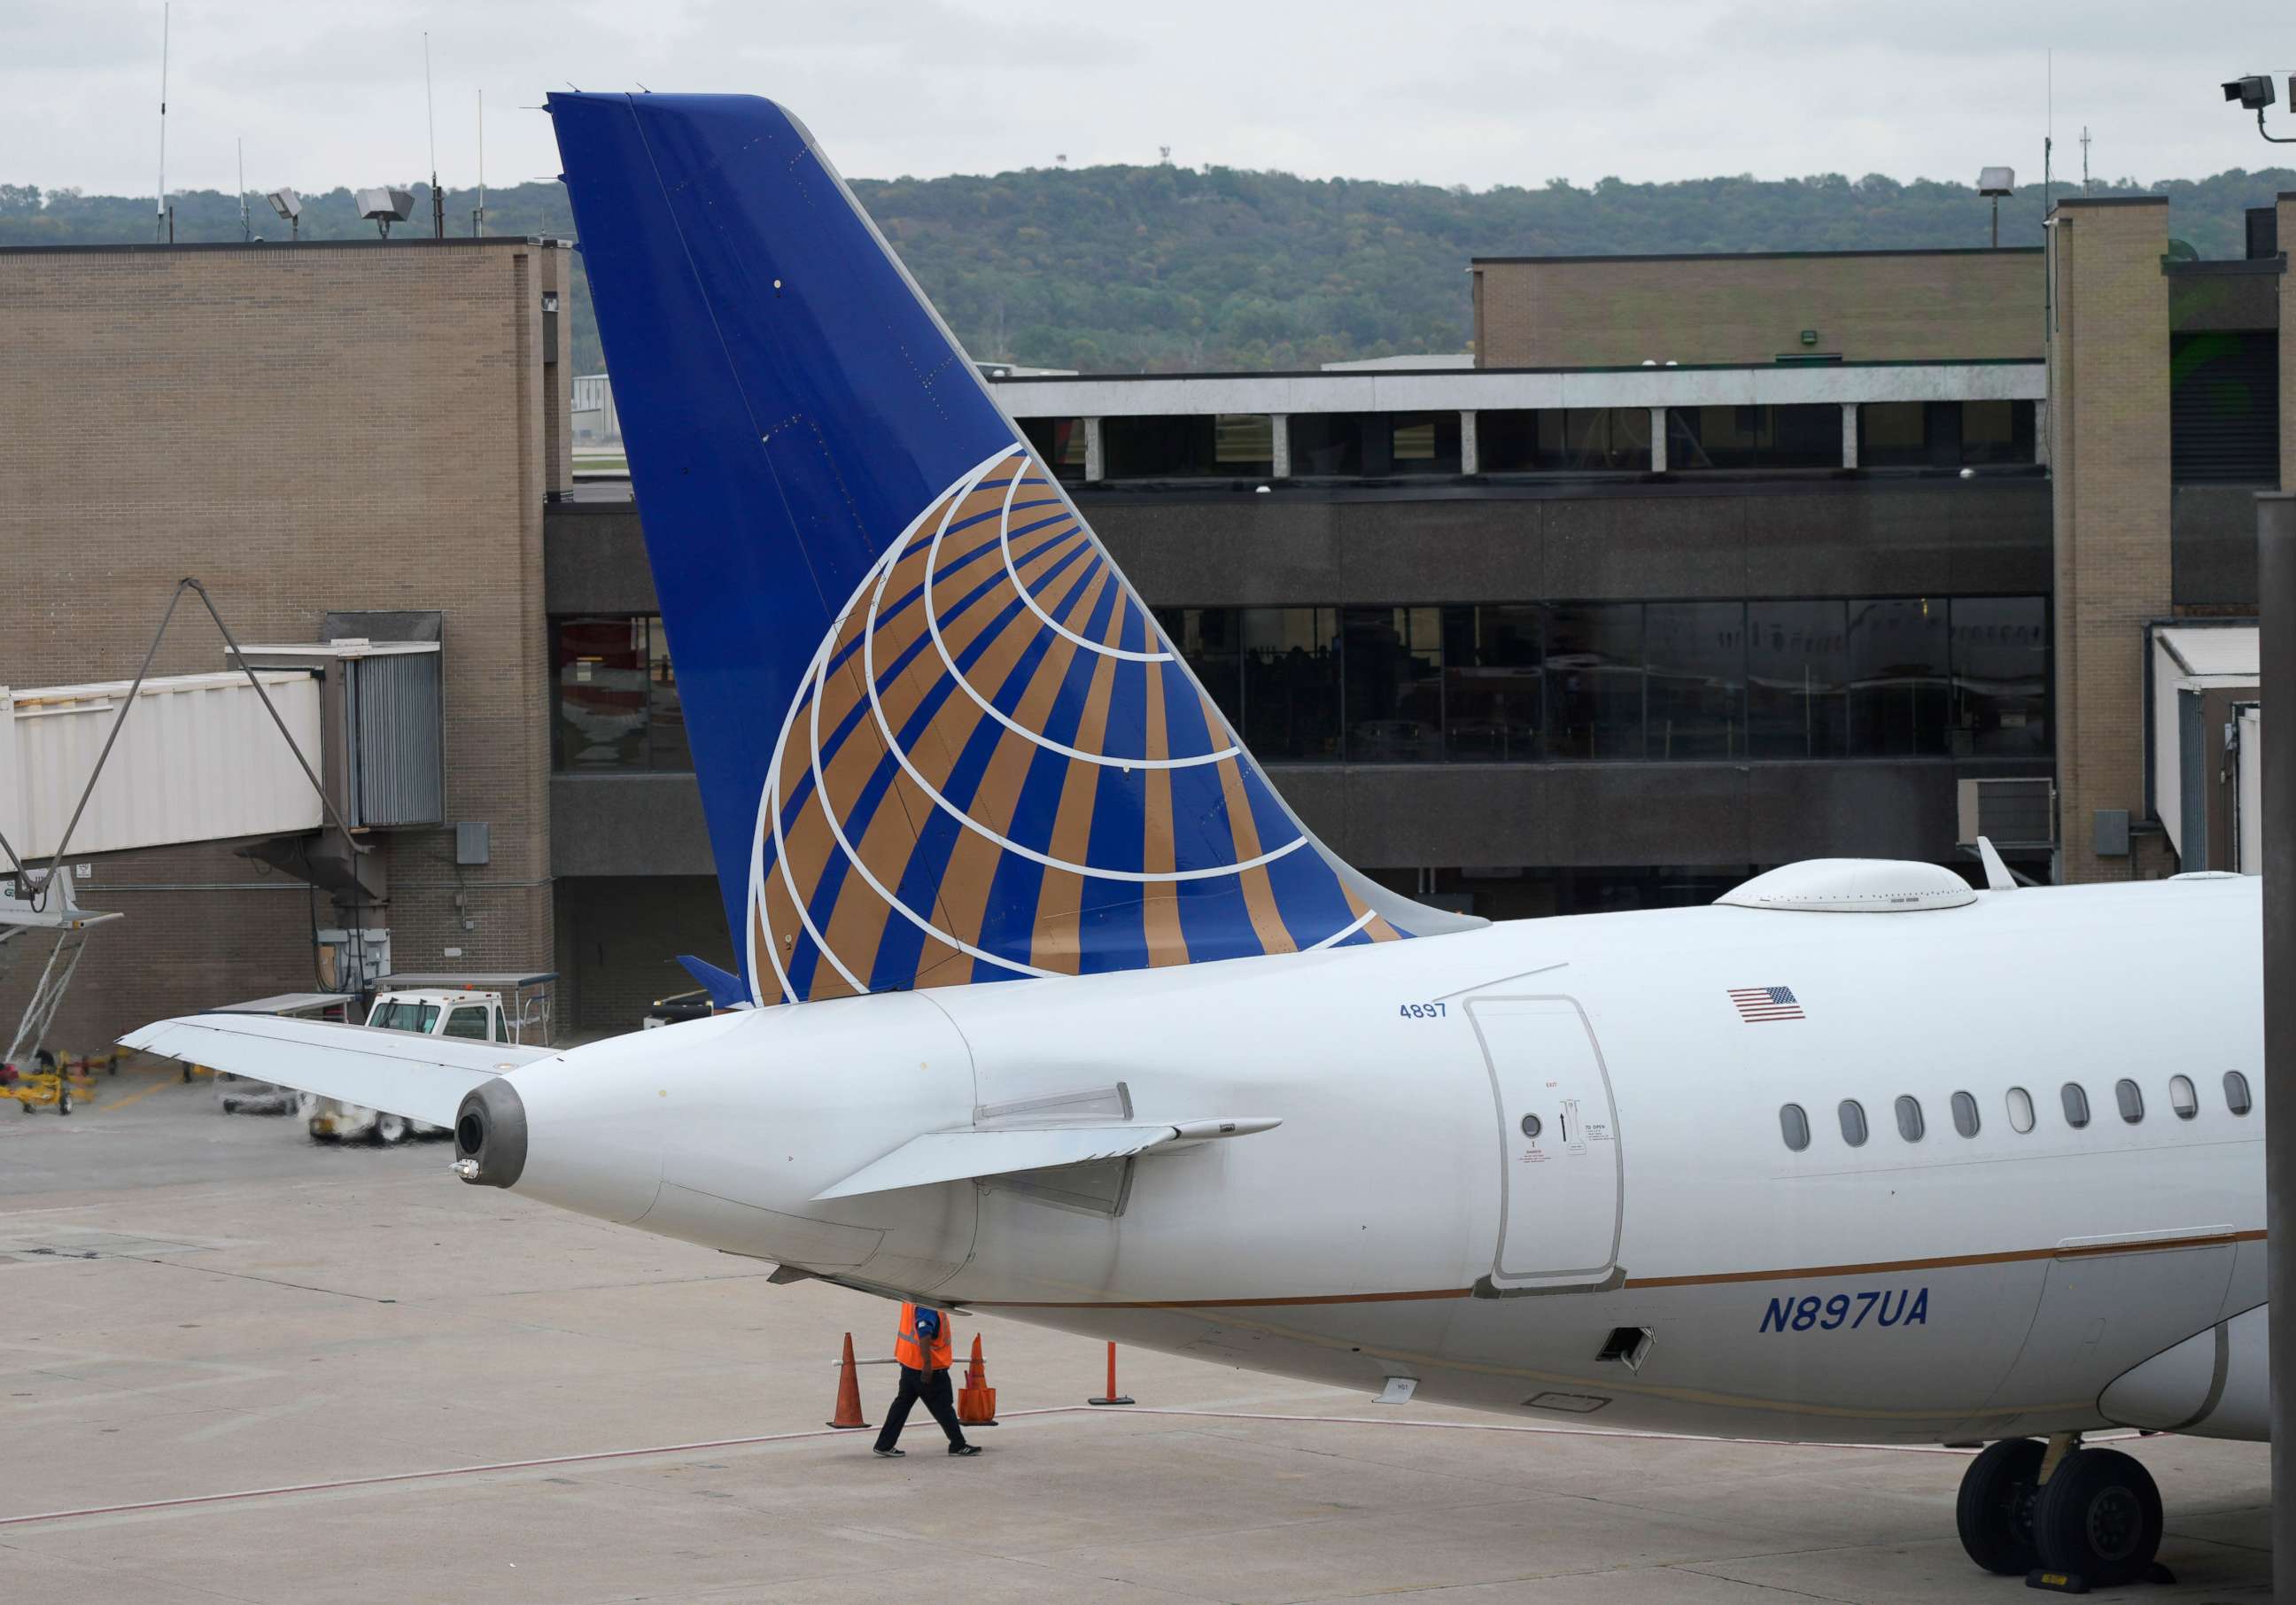 PHOTO: Company logo adorns the tail of a United Airlines jetliner being prepared for departure at Eppley Airfield, Oct. 6, 2021, in Omaha, Neb.